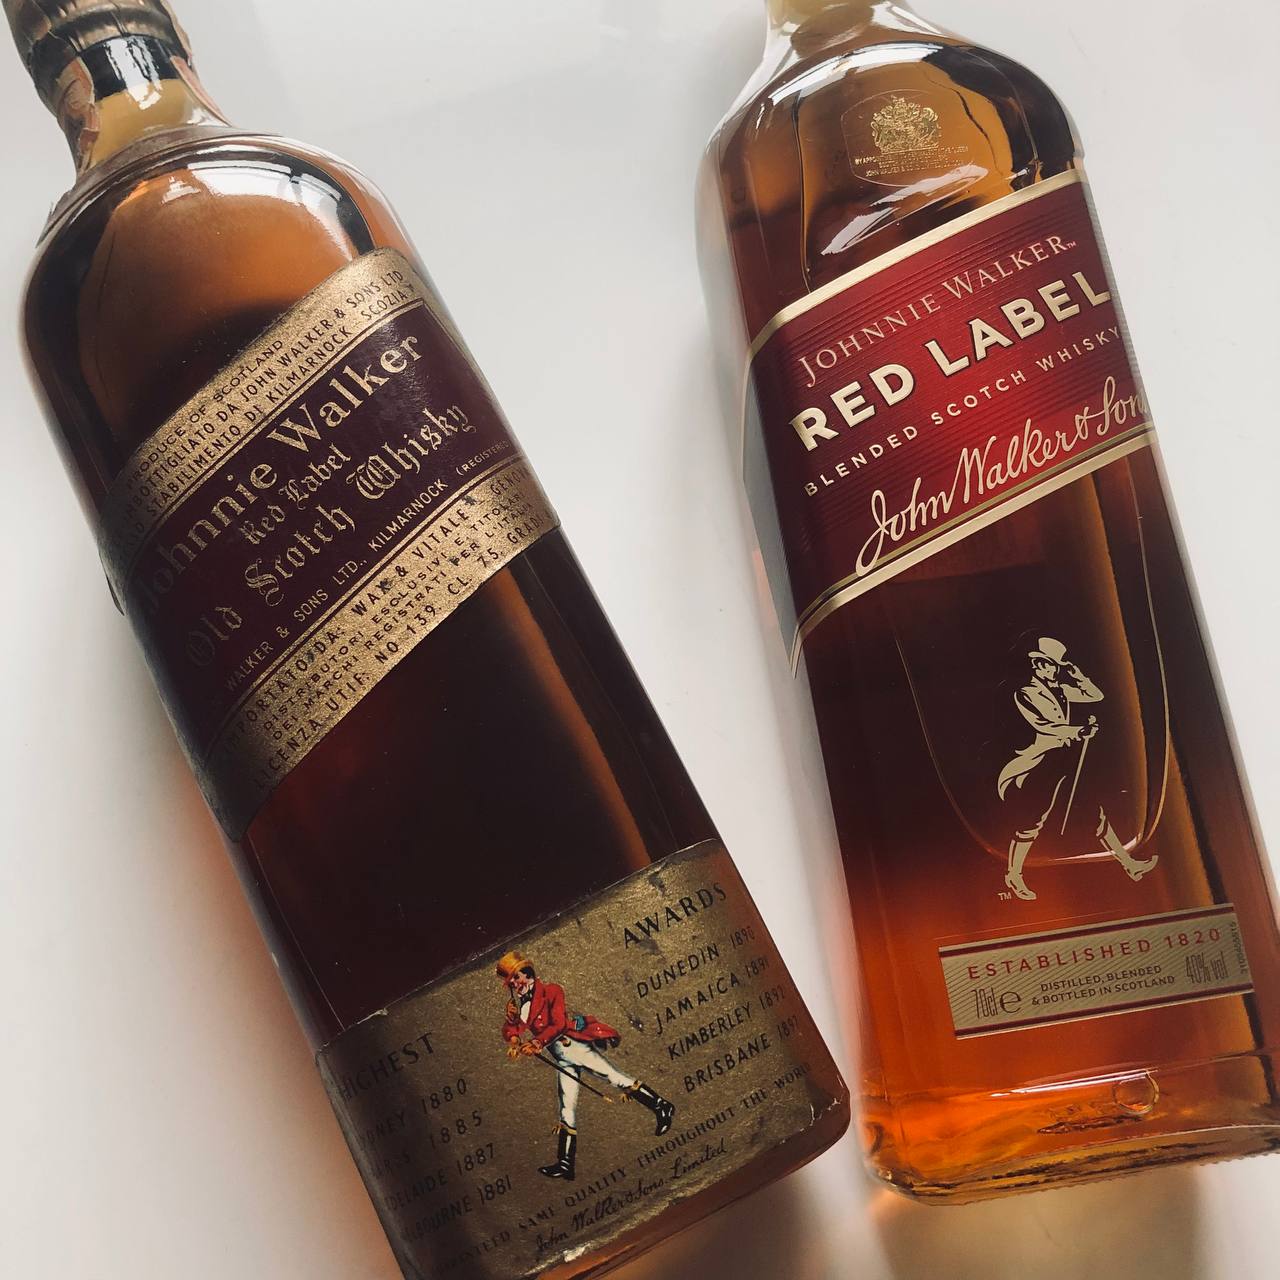 Johnnie Walker Red Label Blended Scotch Whisky Review